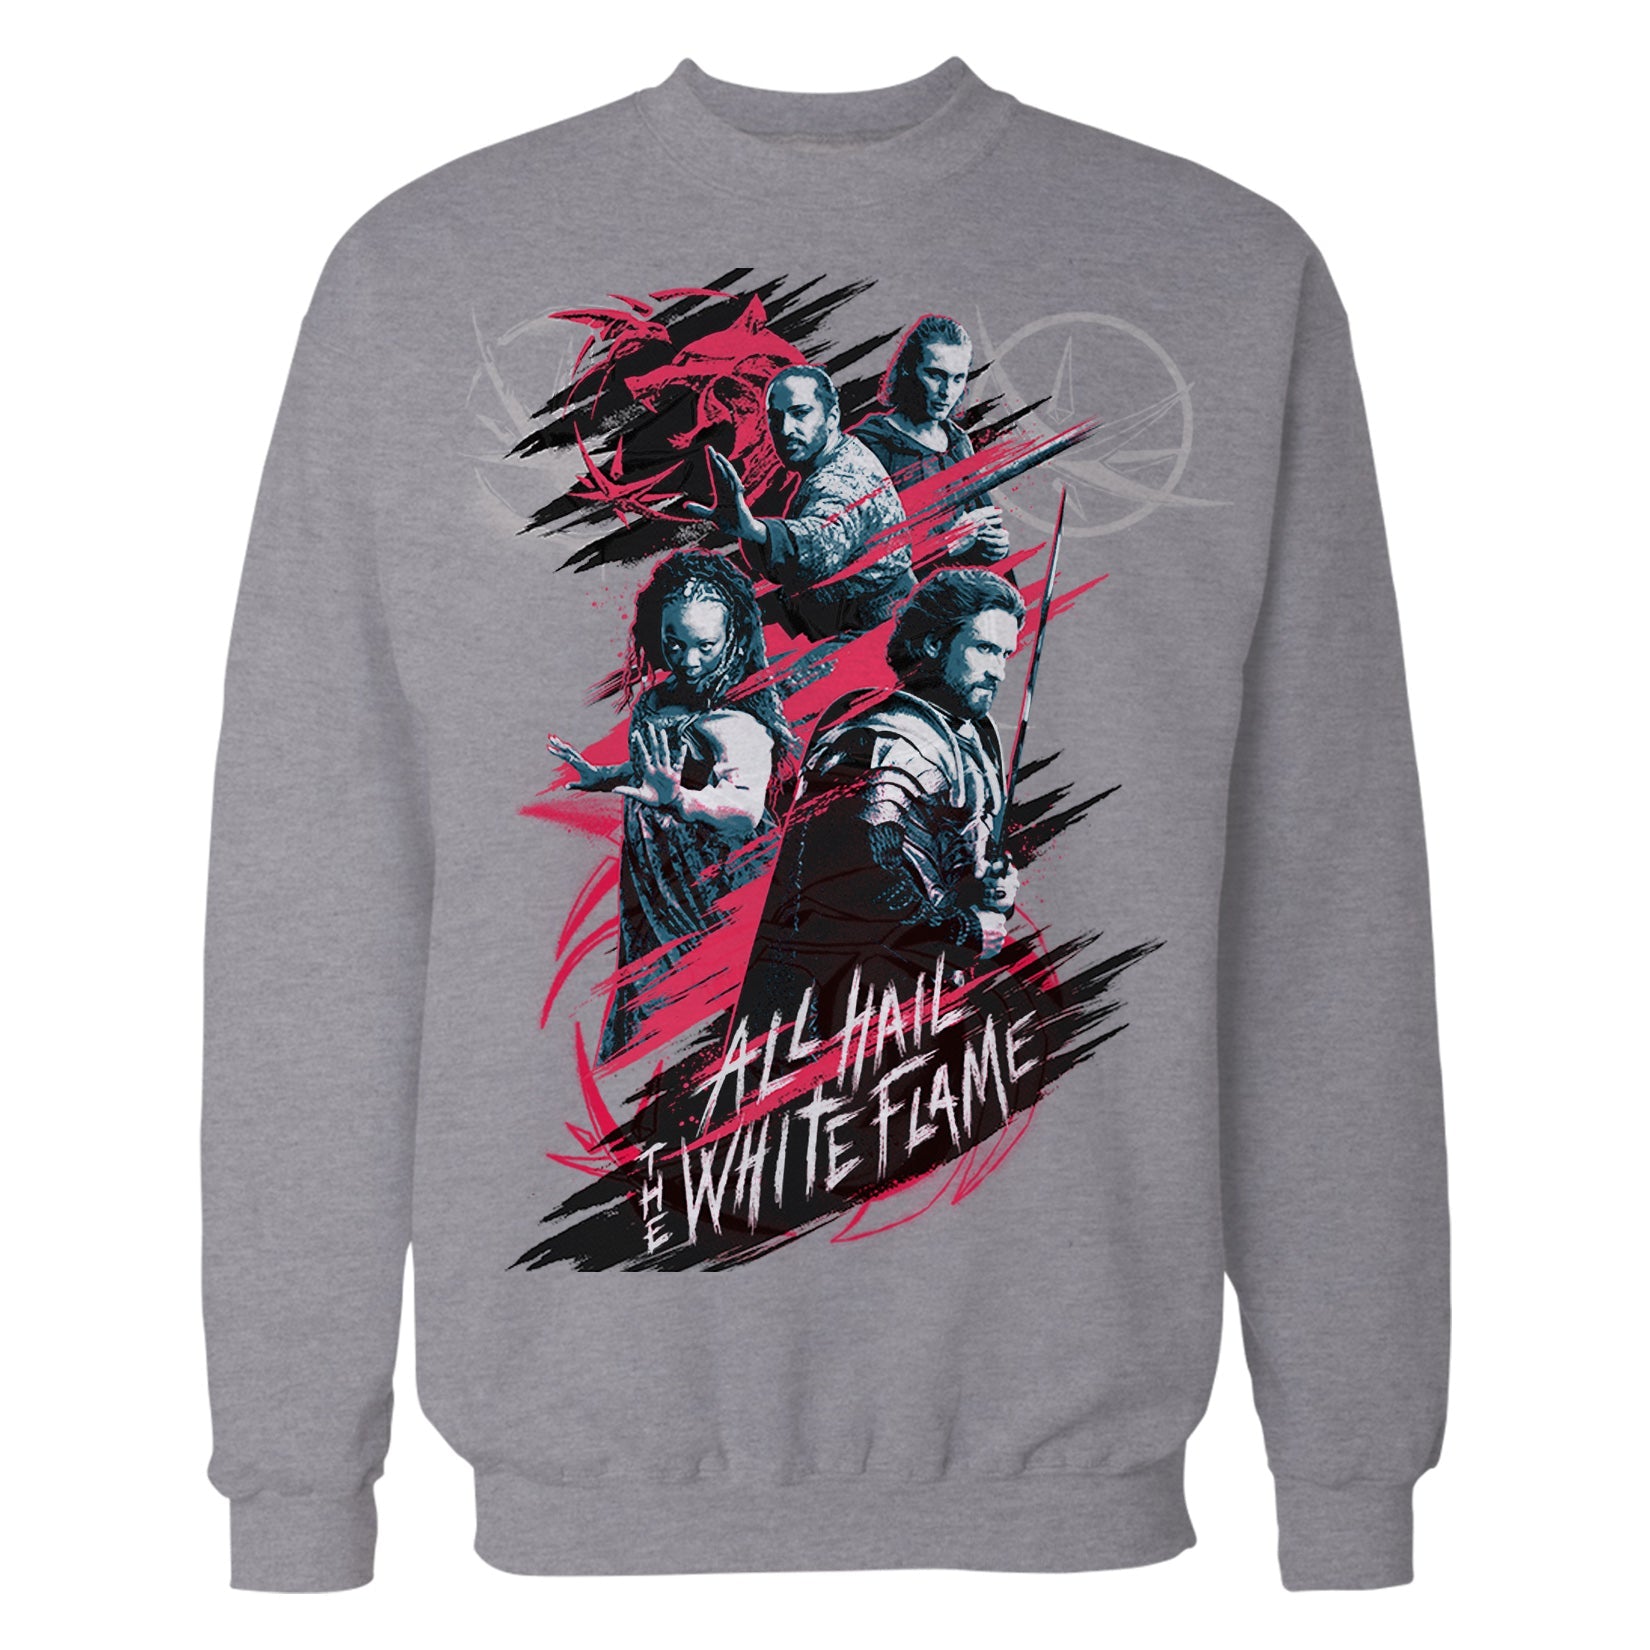 The Witcher Splash White Flame Official Sweatshirt